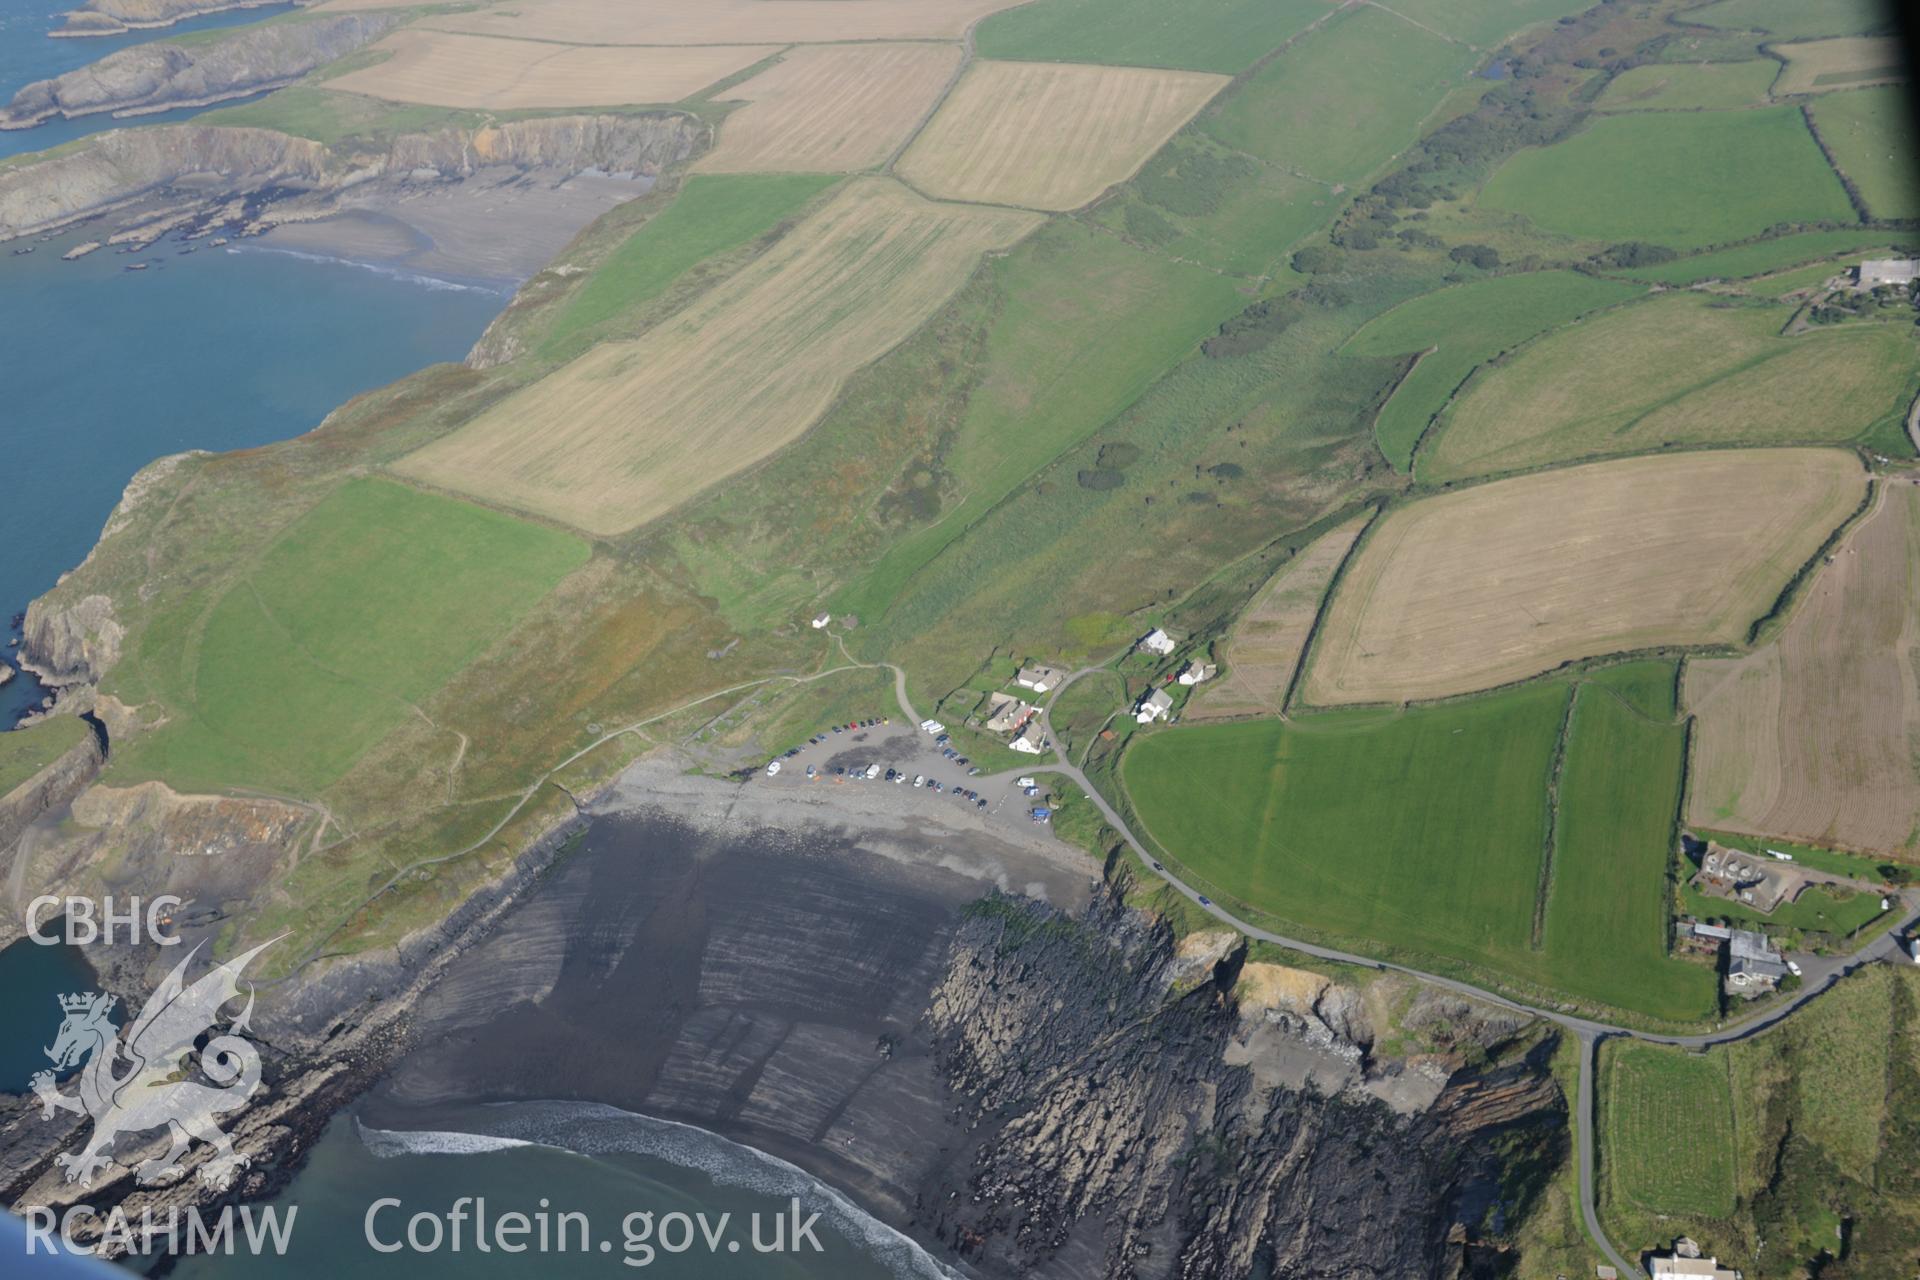 Abereiddy village, Bank farm and house; The Villa; beach cottage and Swn-y-Mor house. Oblique aerial photograph taken during the Royal Commission's programme of archaeological aerial reconnaissance by Toby Driver on 30th September 2015.